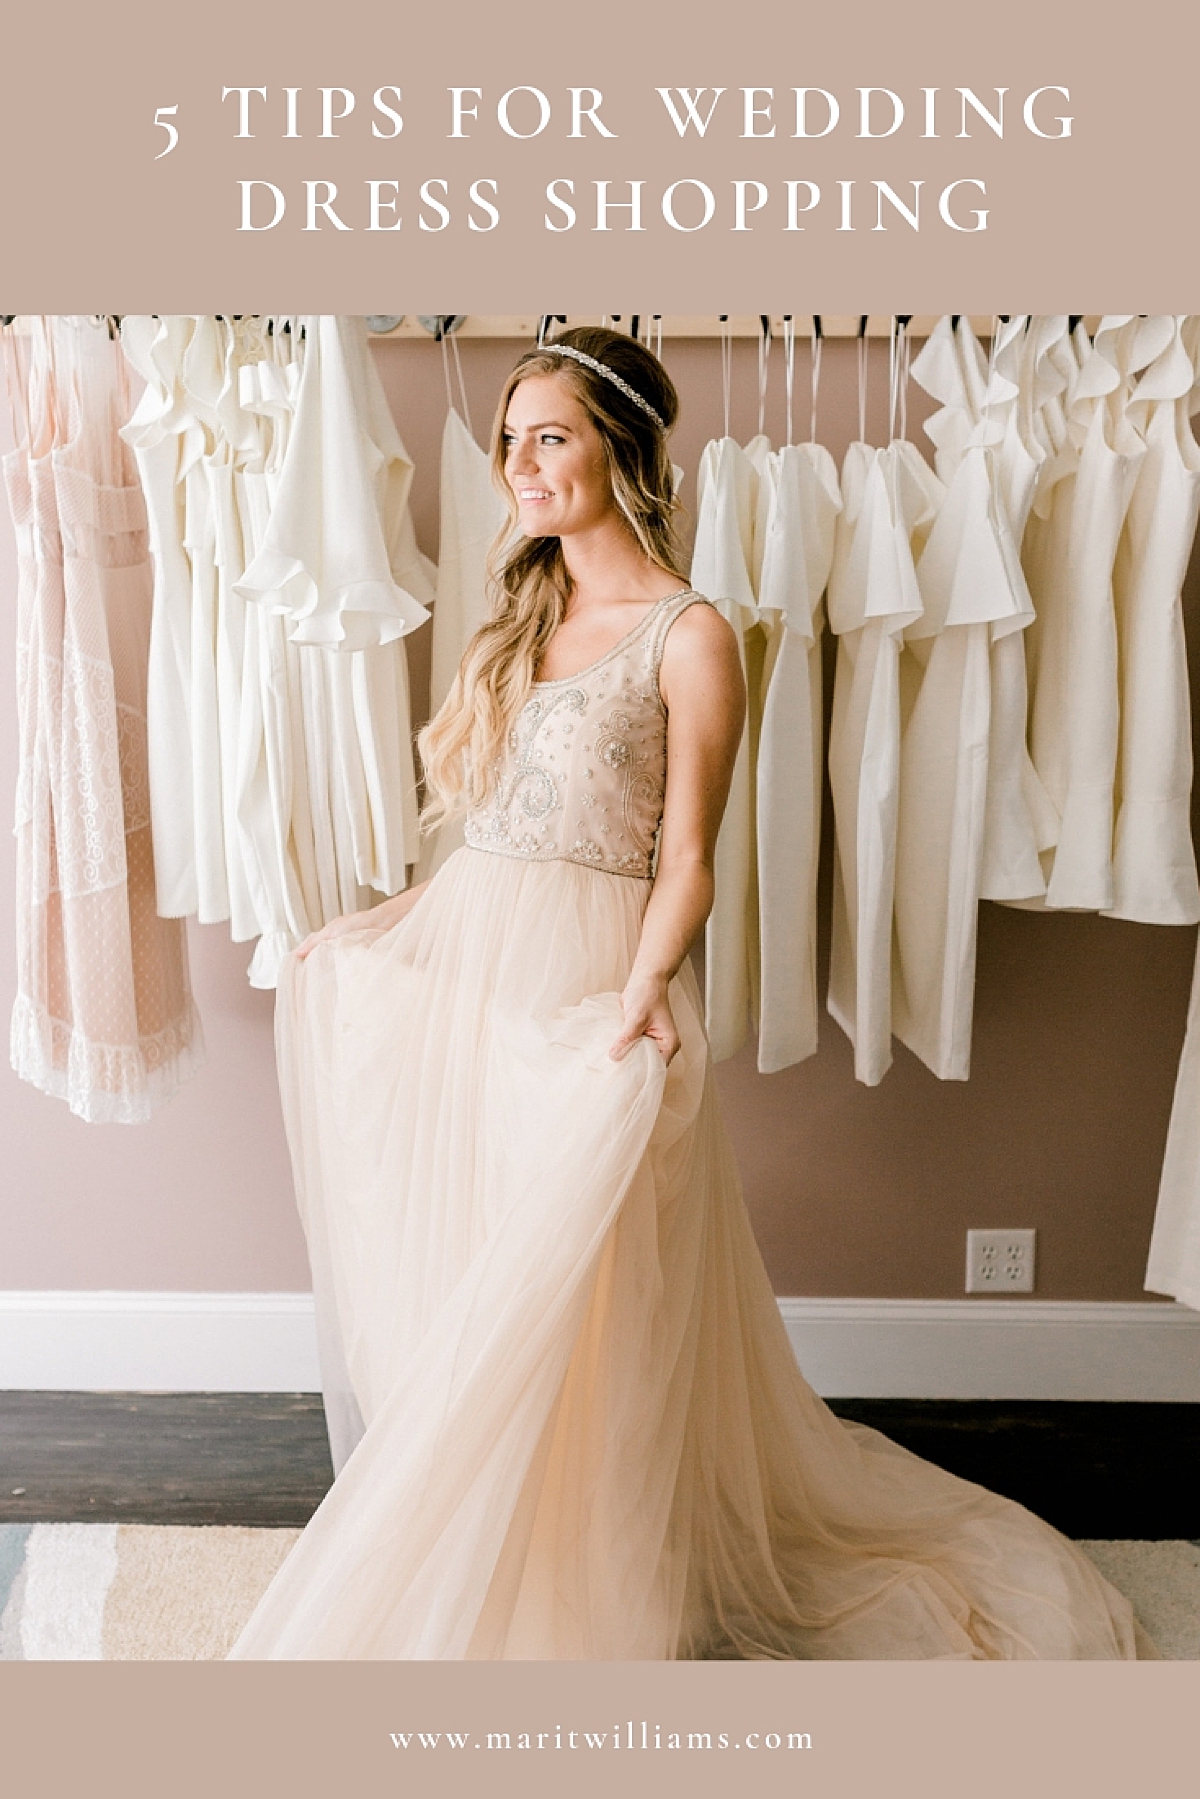 Finery Bridal Boutique owner shares 5 tips for successful wedding dress shopping